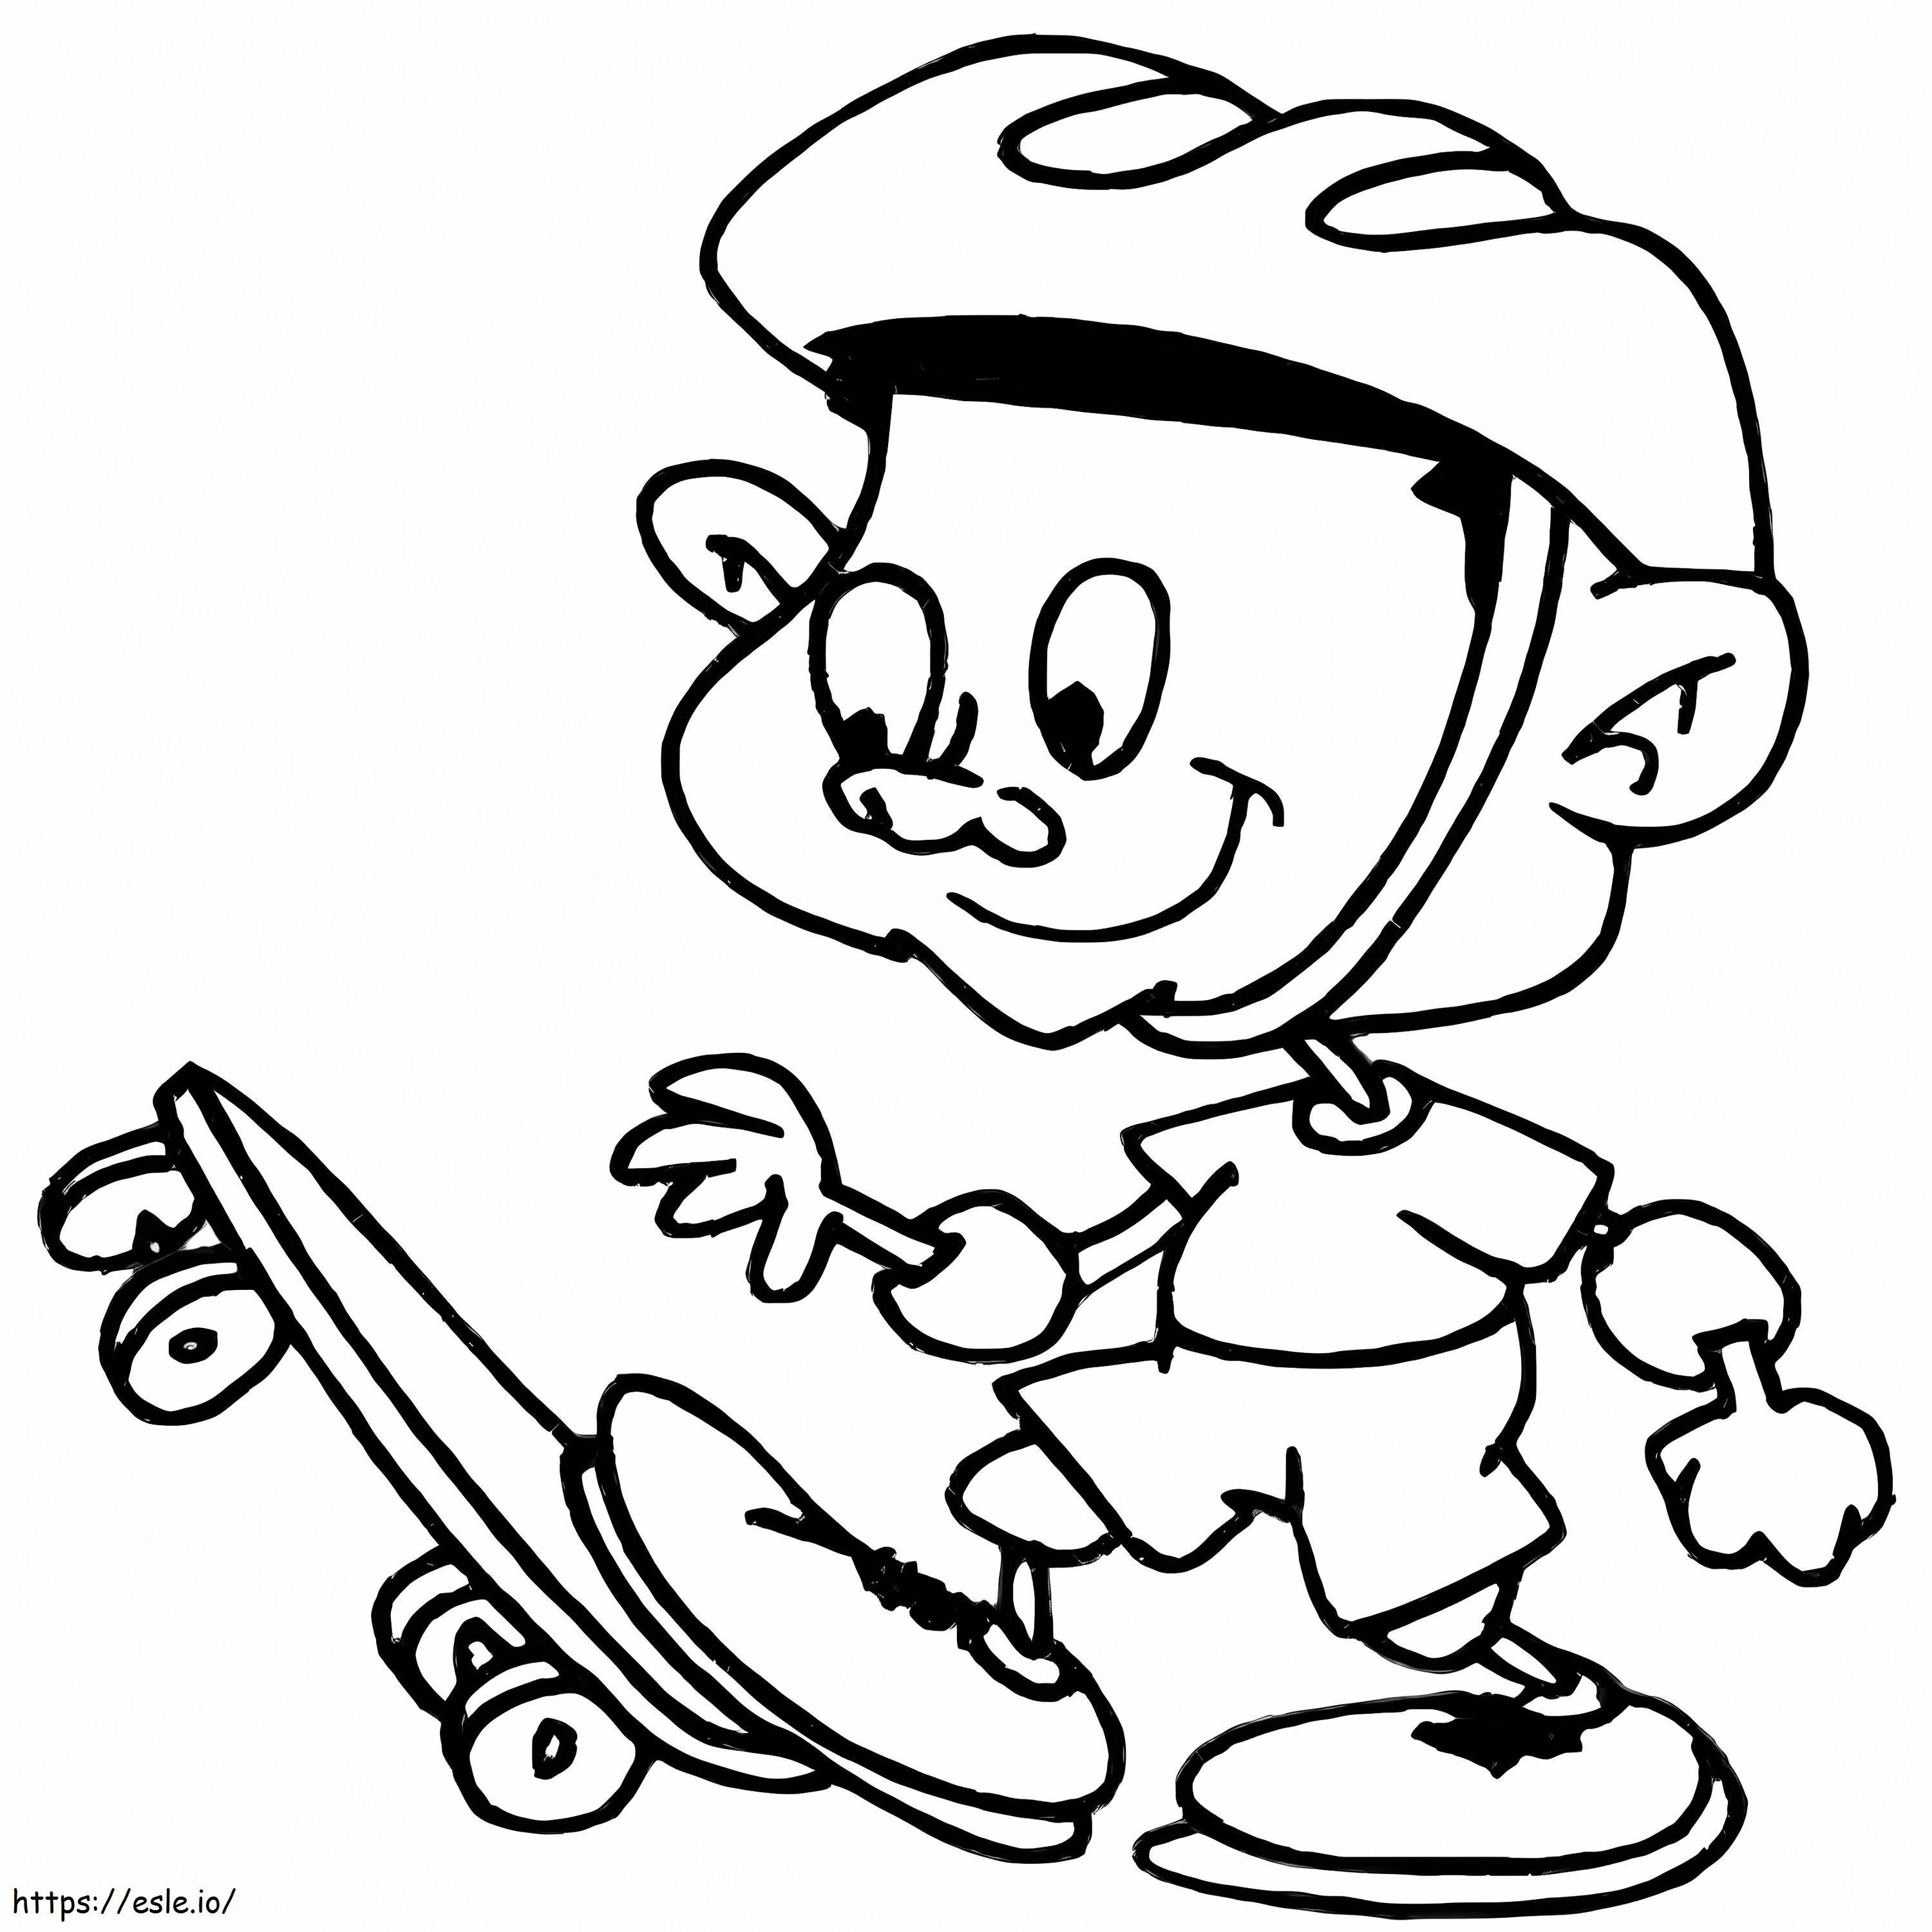 Boy And Skateboard coloring page